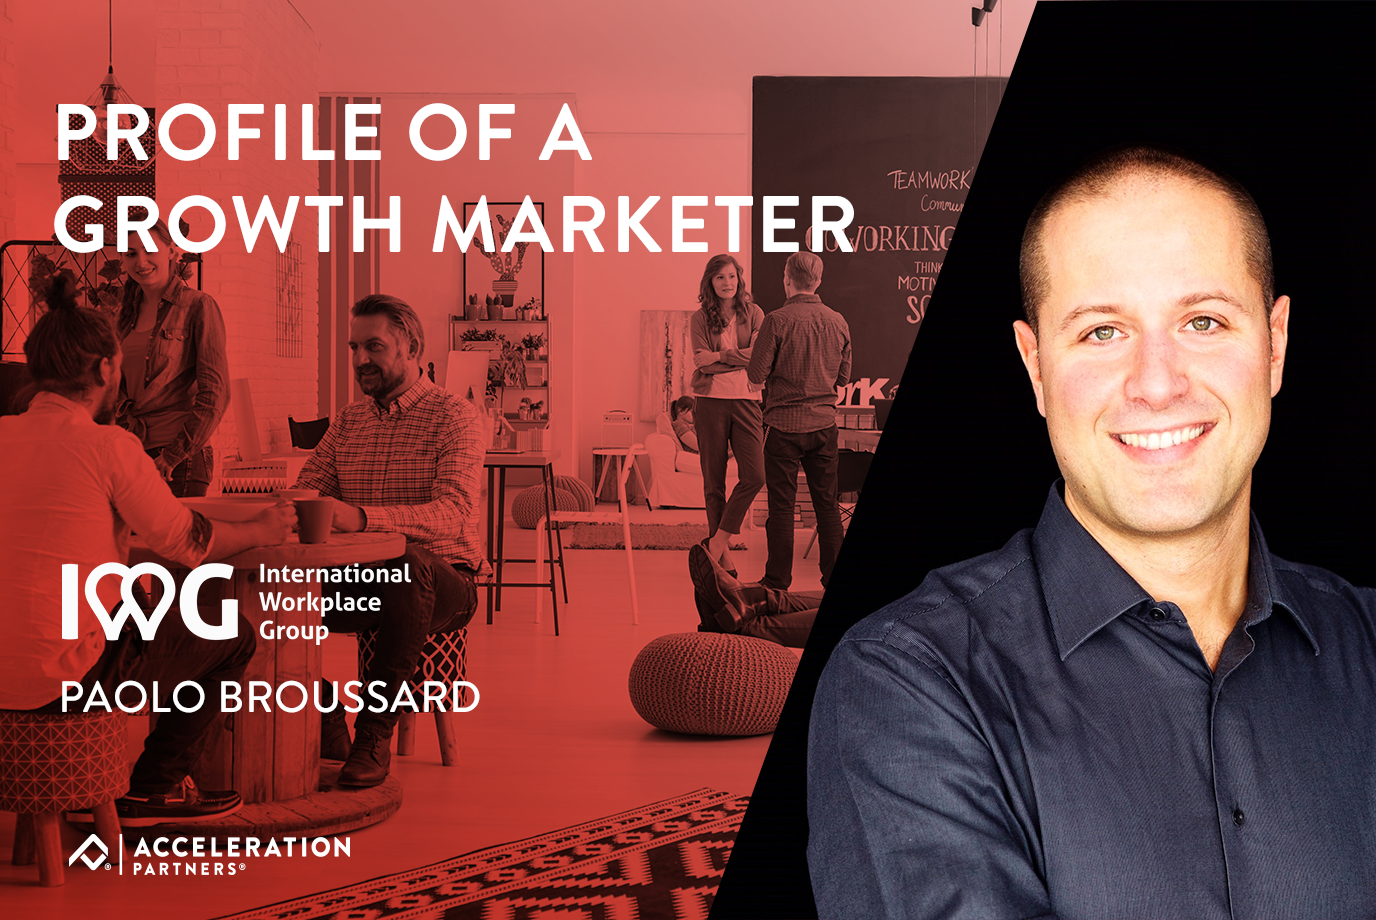 Profile of a growth marketer: Paolo Broussard, IWG plc